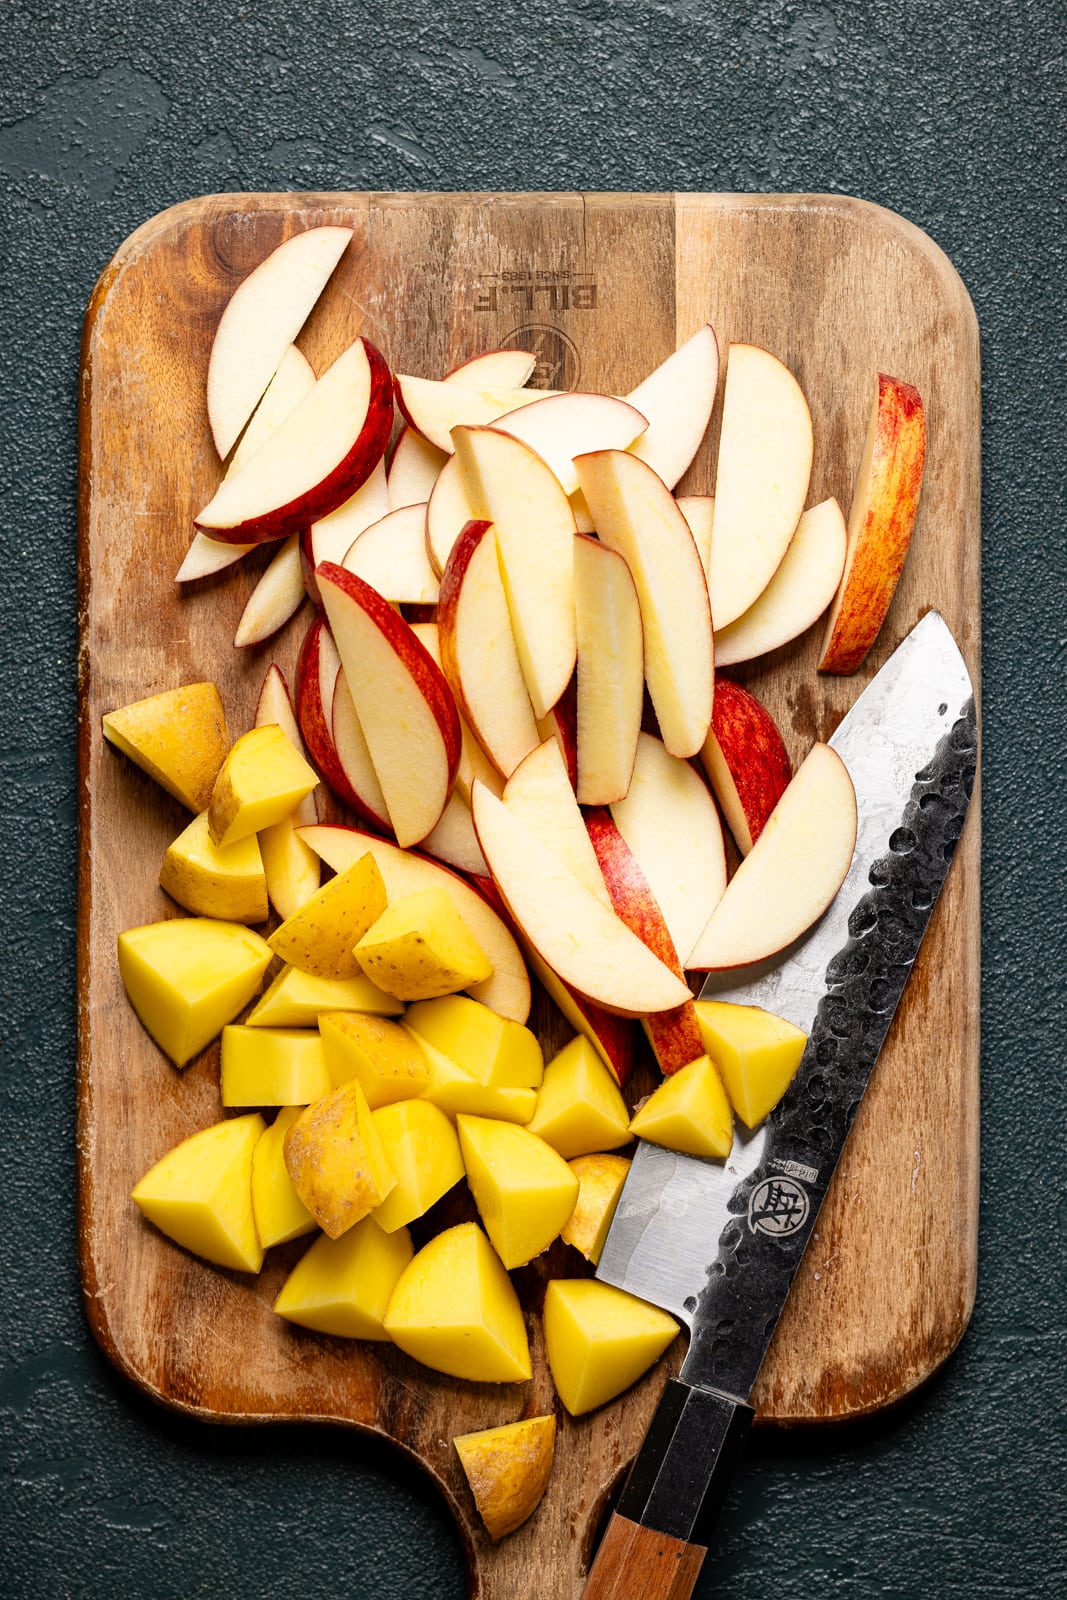 Chopped apples and potatoes on a cutting board with a knife.